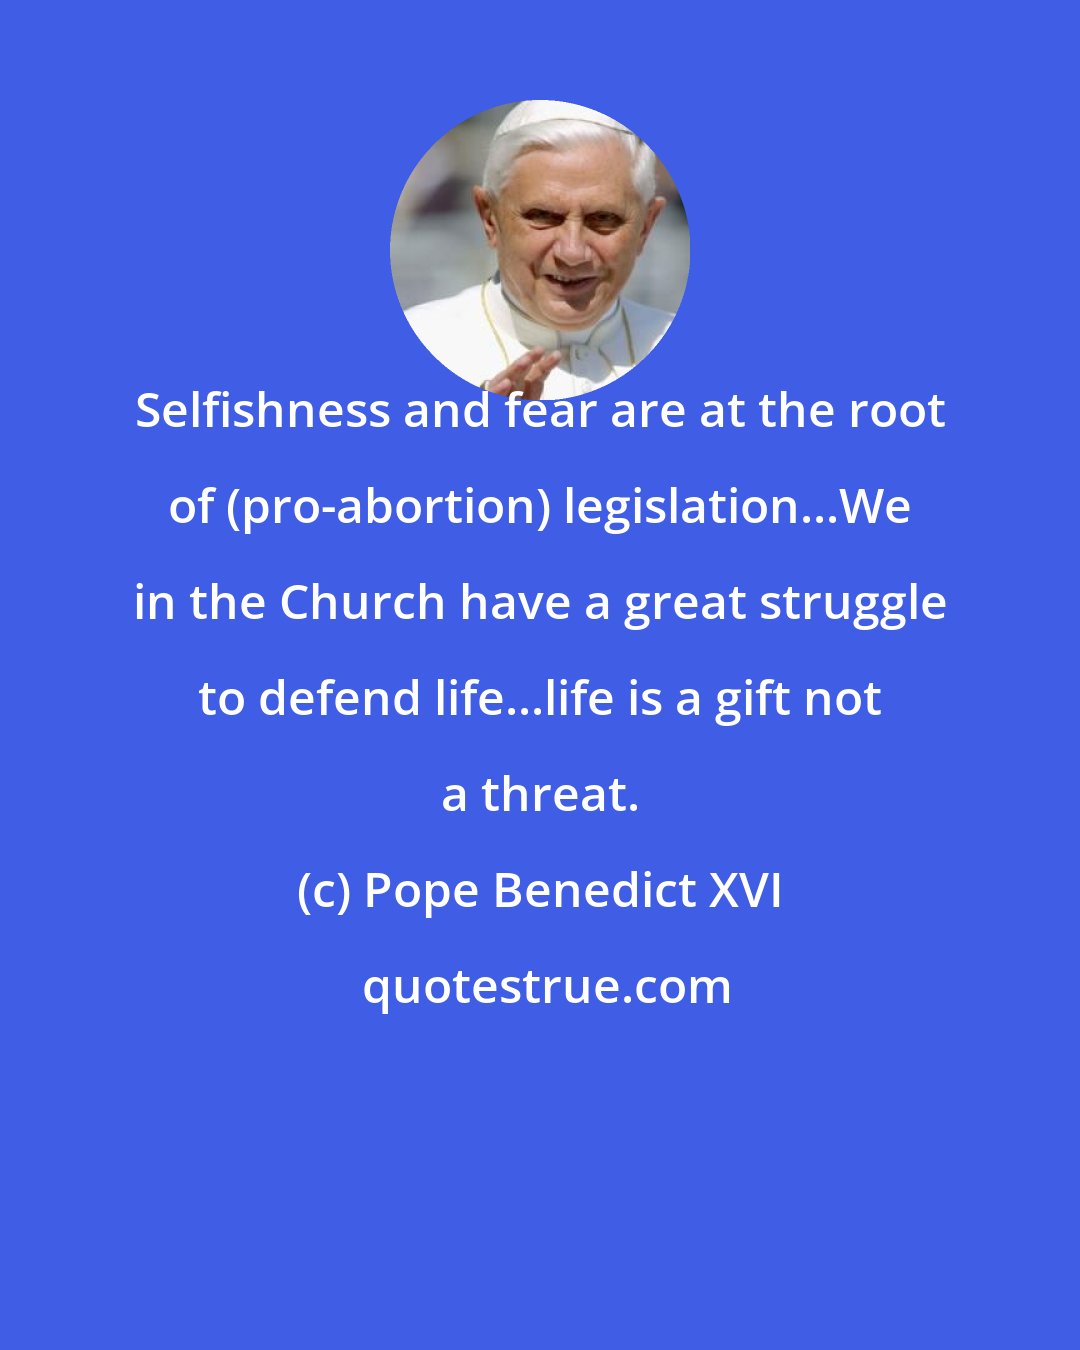 Pope Benedict XVI: Selfishness and fear are at the root of (pro-abortion) legislation...We in the Church have a great struggle to defend life...life is a gift not a threat.